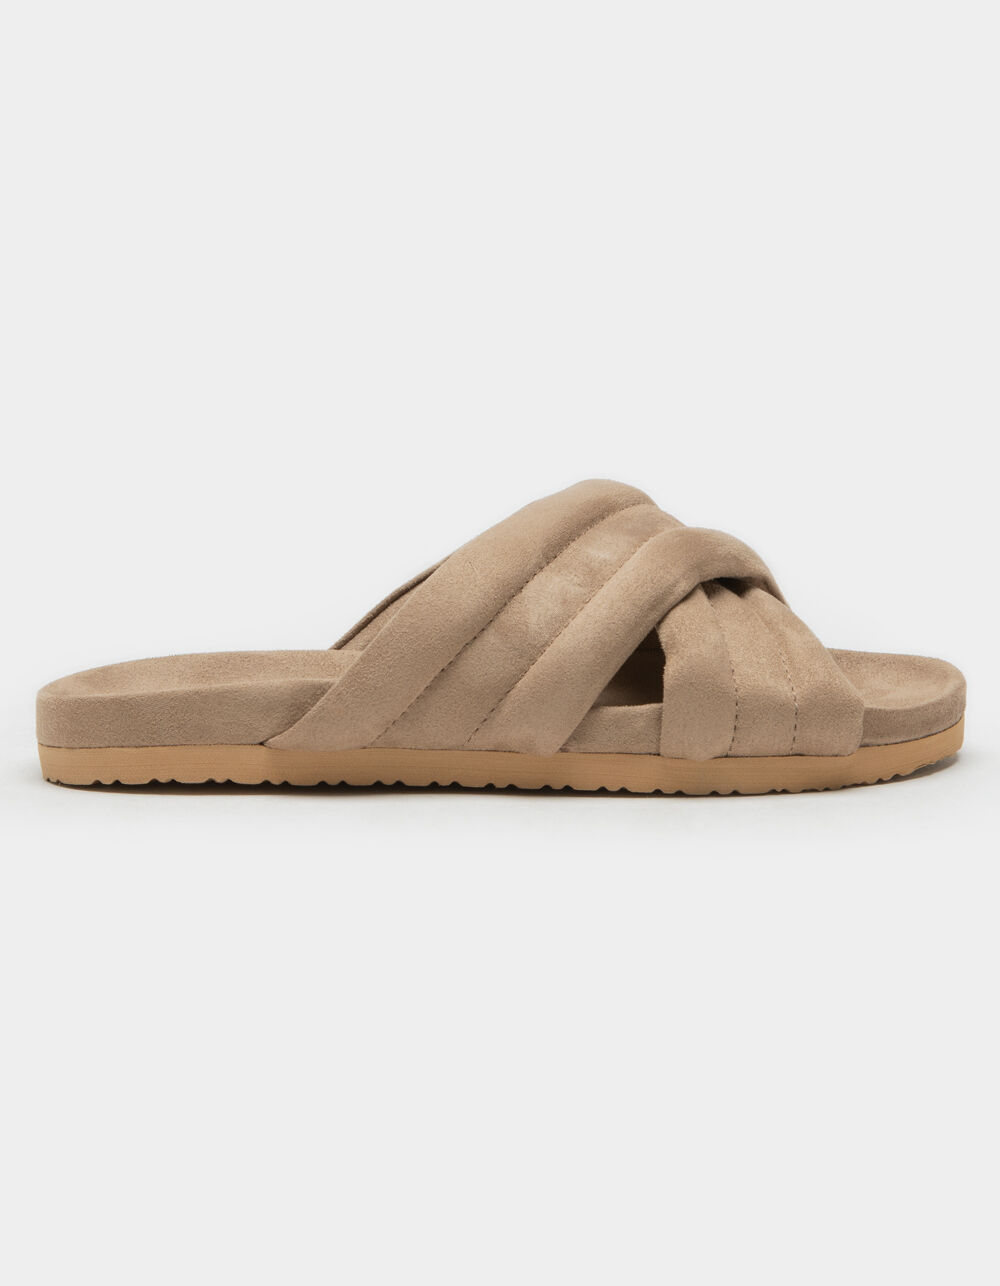 BC FOOTWEAR Game Over Taupe Slide Sandals - TAUPE - 405066413